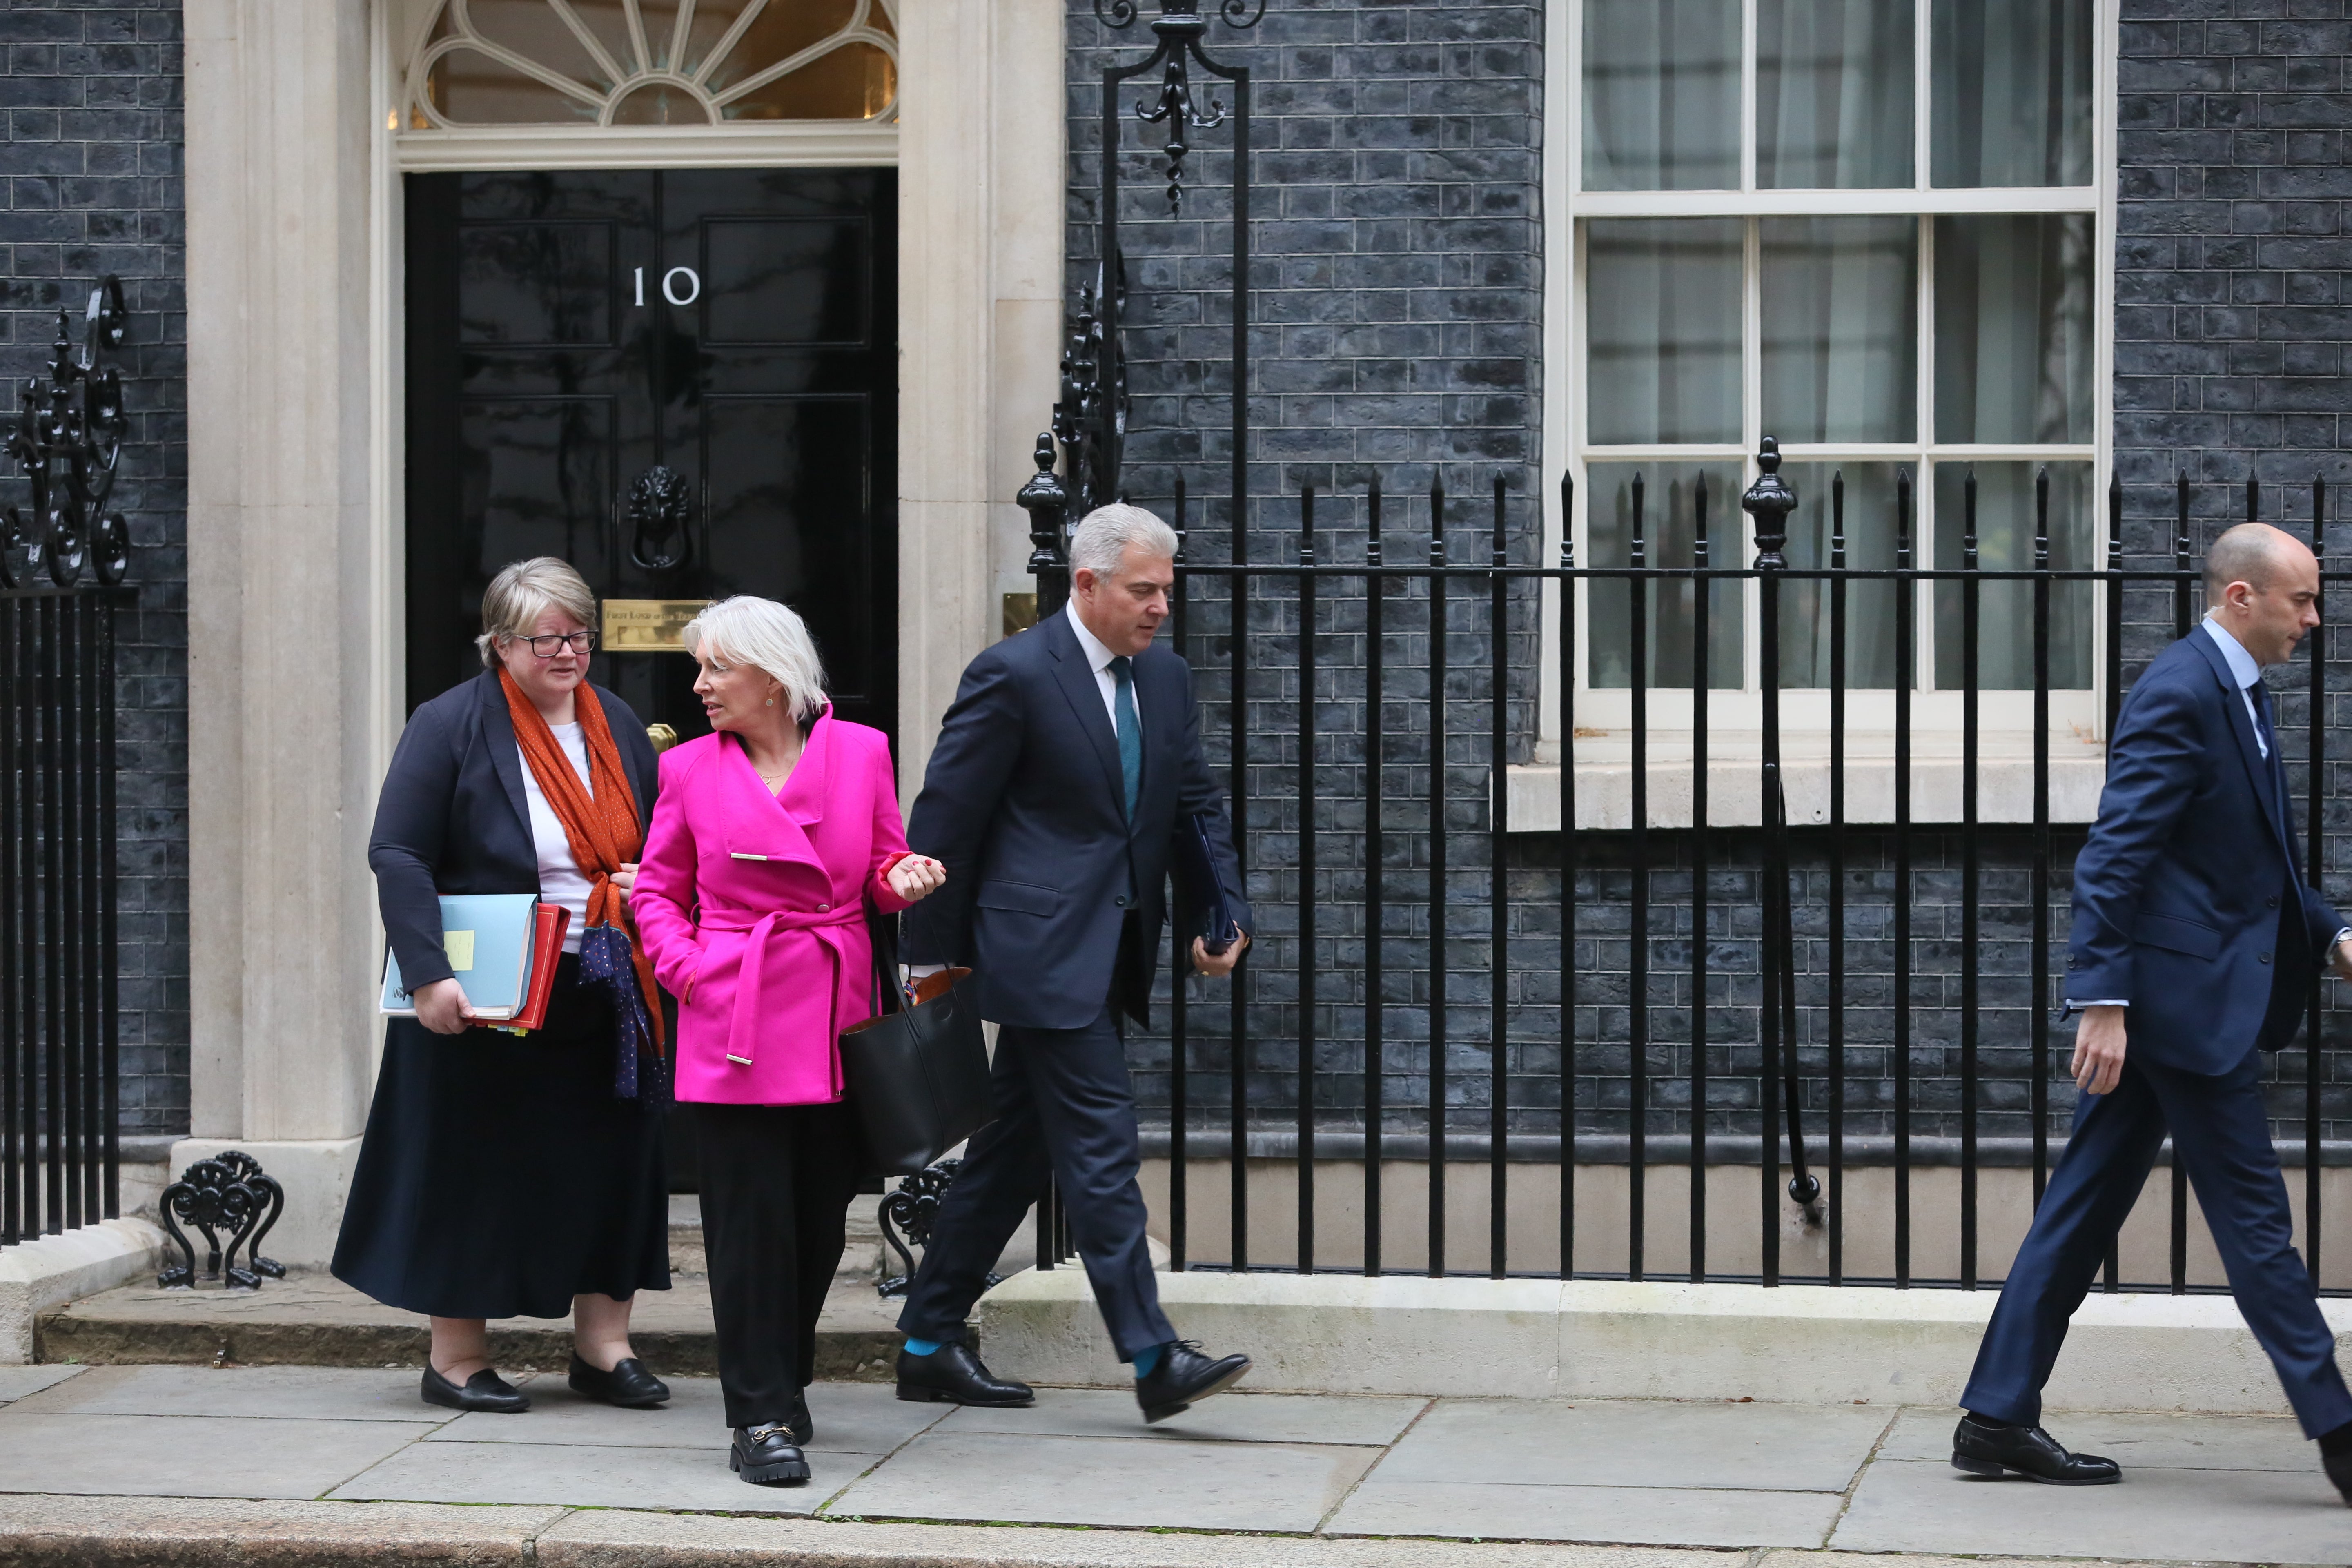 Ministers leave 10 Downing Street following this morning’s cabinet meeting